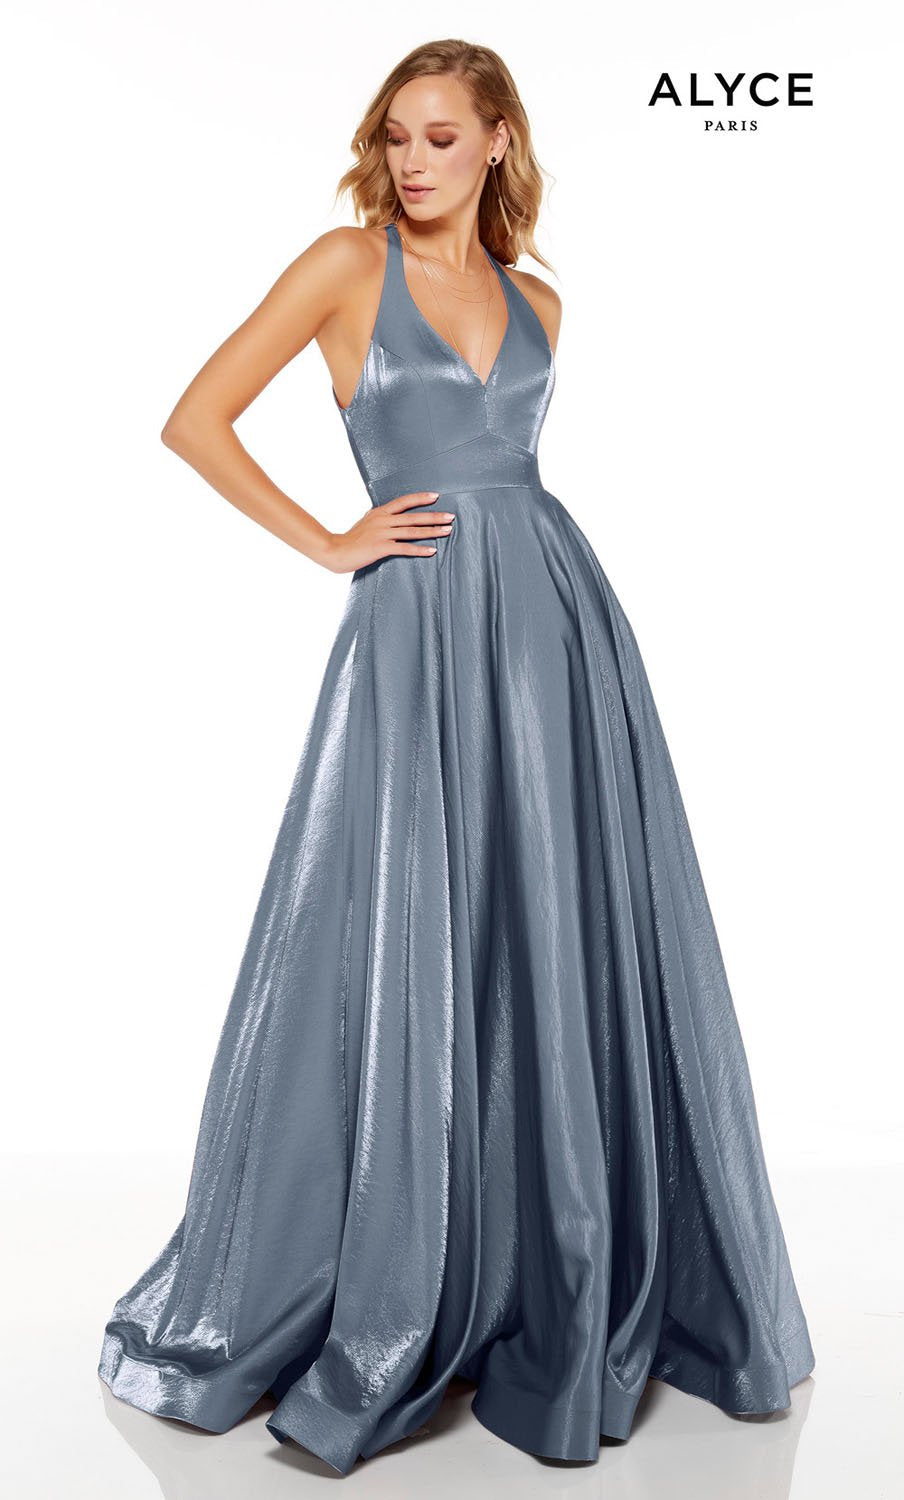 Alyce Paris 60623 dress images in these colors: Demure, French Blue, Wine, Dragonfly.